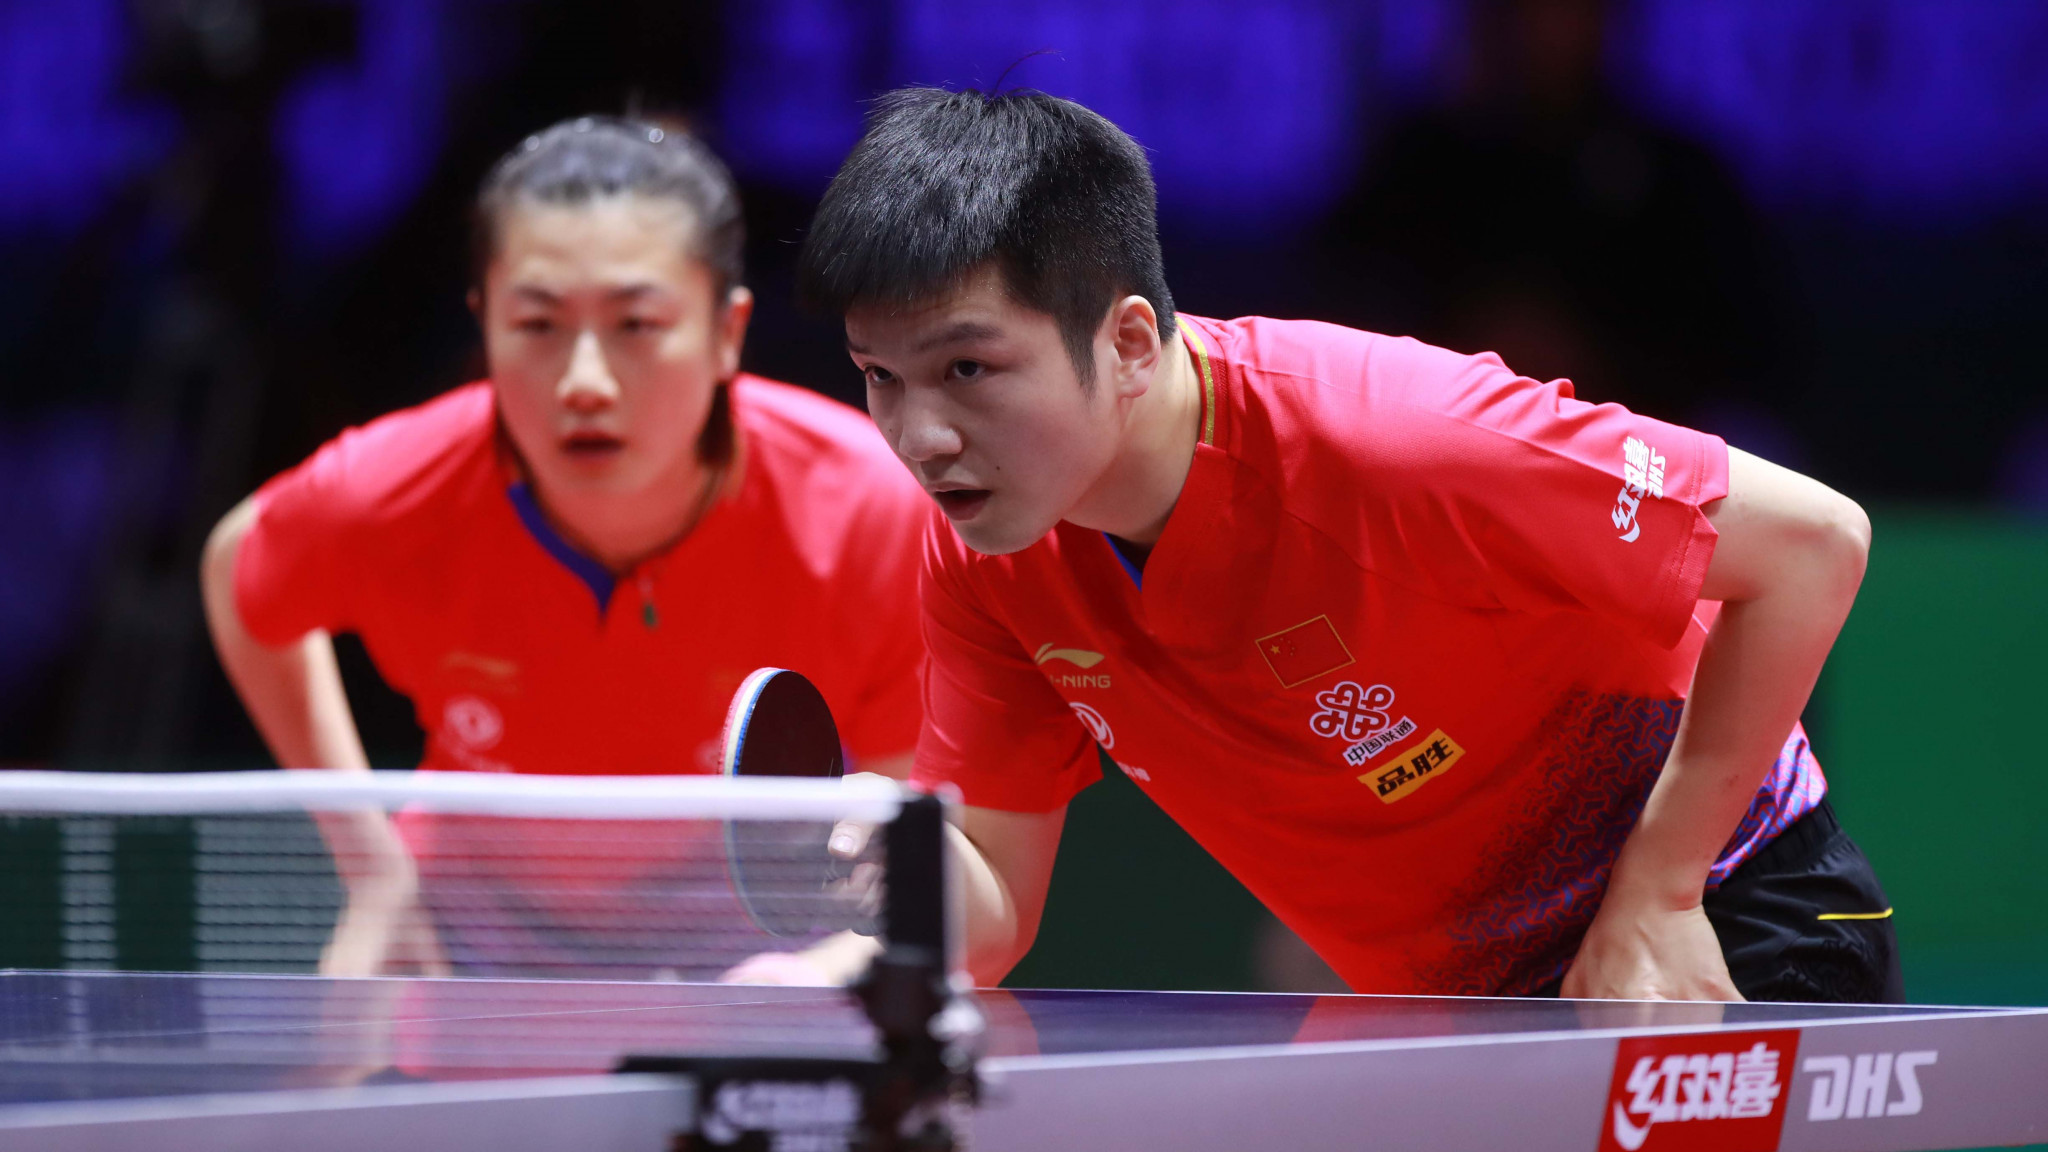 Top singles seeds Fan and Ding reach mixed doubles main draw at ITTF World Championships